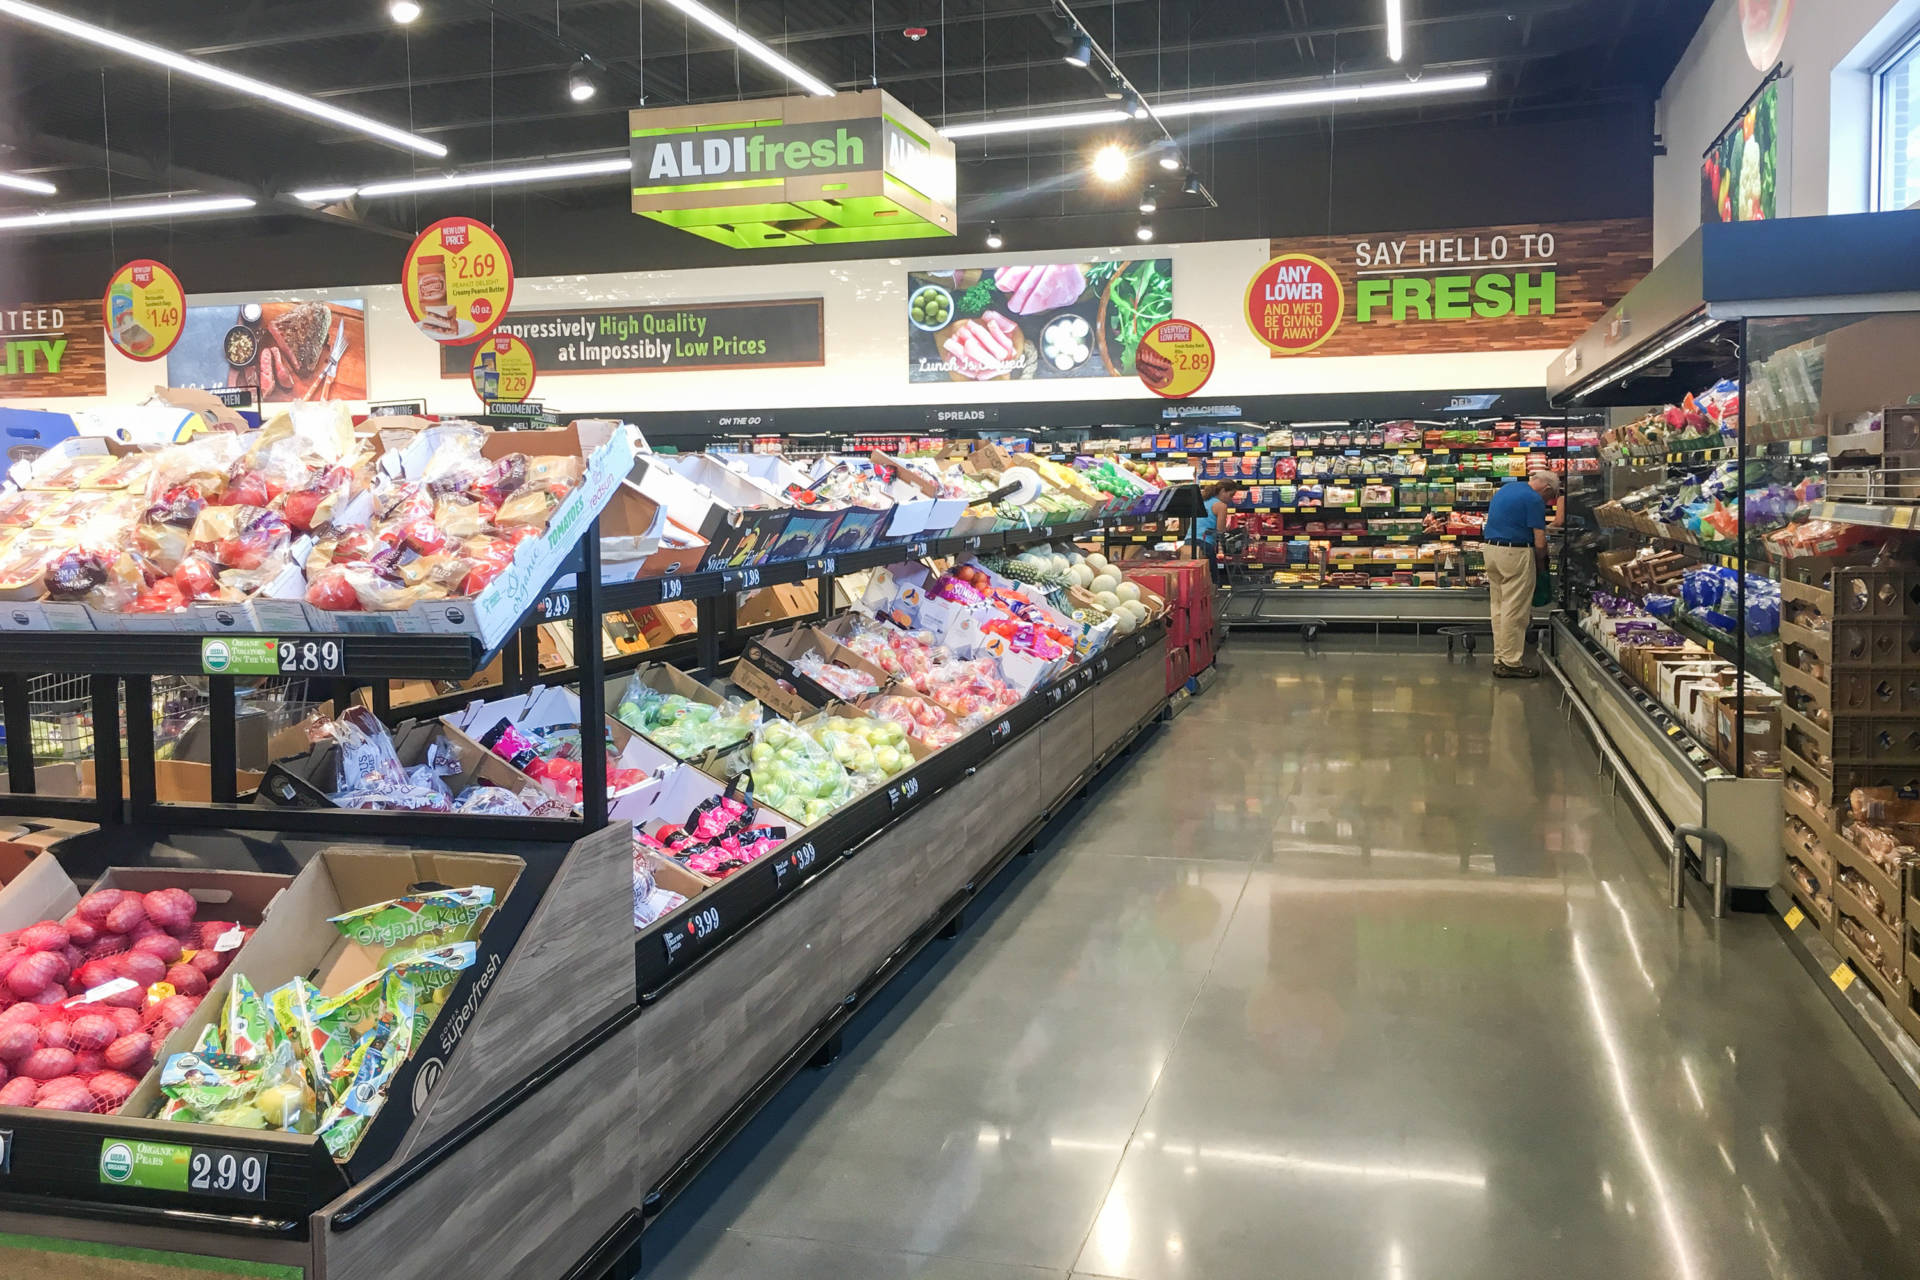 Aldi, which has been in the U.S. since the 1970s, has been updating its look and product selection, adding more fresh produce, among other things.